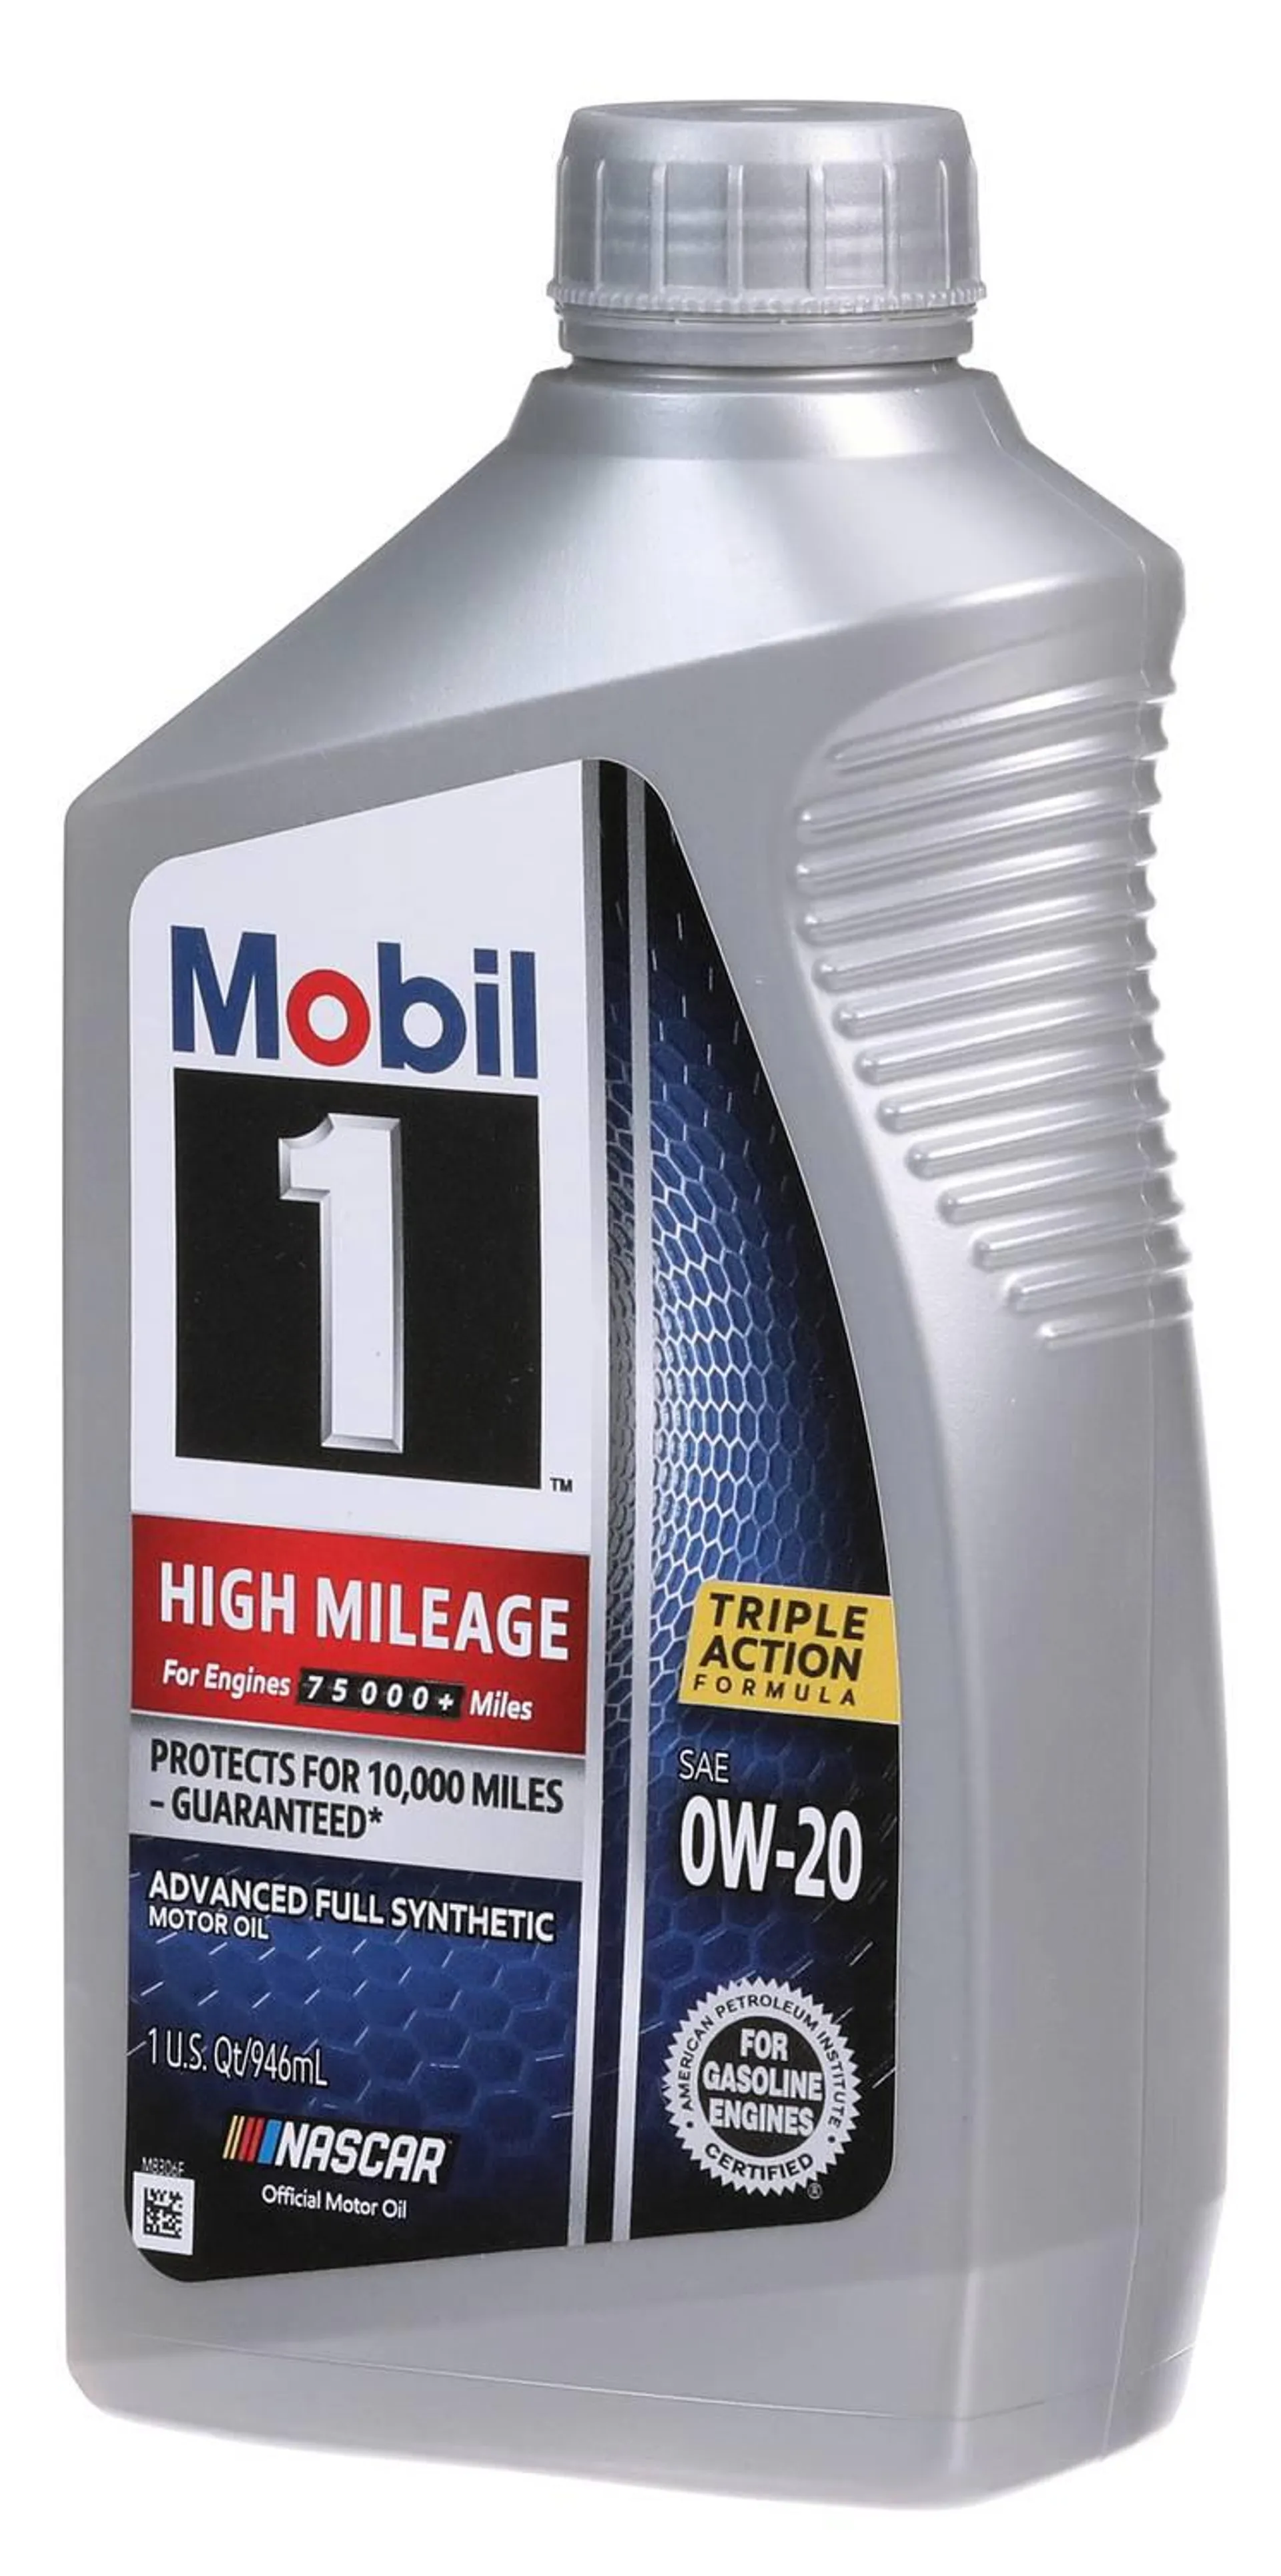 Mobil 1 High Mileage Full Synthetic Full Synthetic High Mileage Motor Oil 0W-20 1 Quart - HI1-0-20